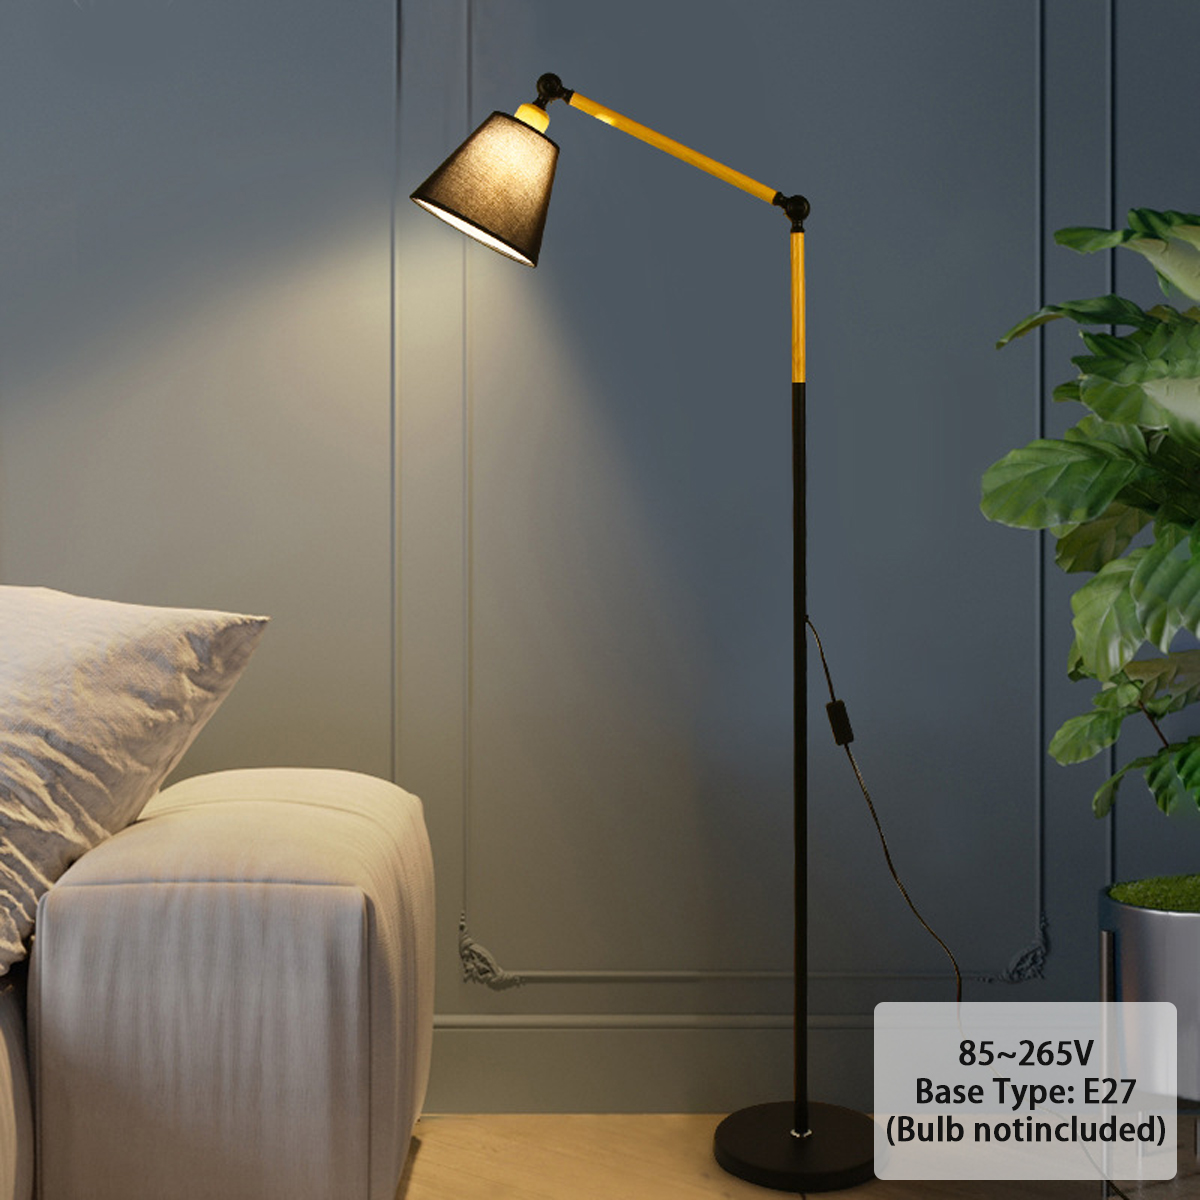 Find 85v~265V Modern Floor Lamp Wooden Iron Hanging Lamp For Shop Restaurant Bar Without Bulb for Sale on Gipsybee.com with cryptocurrencies